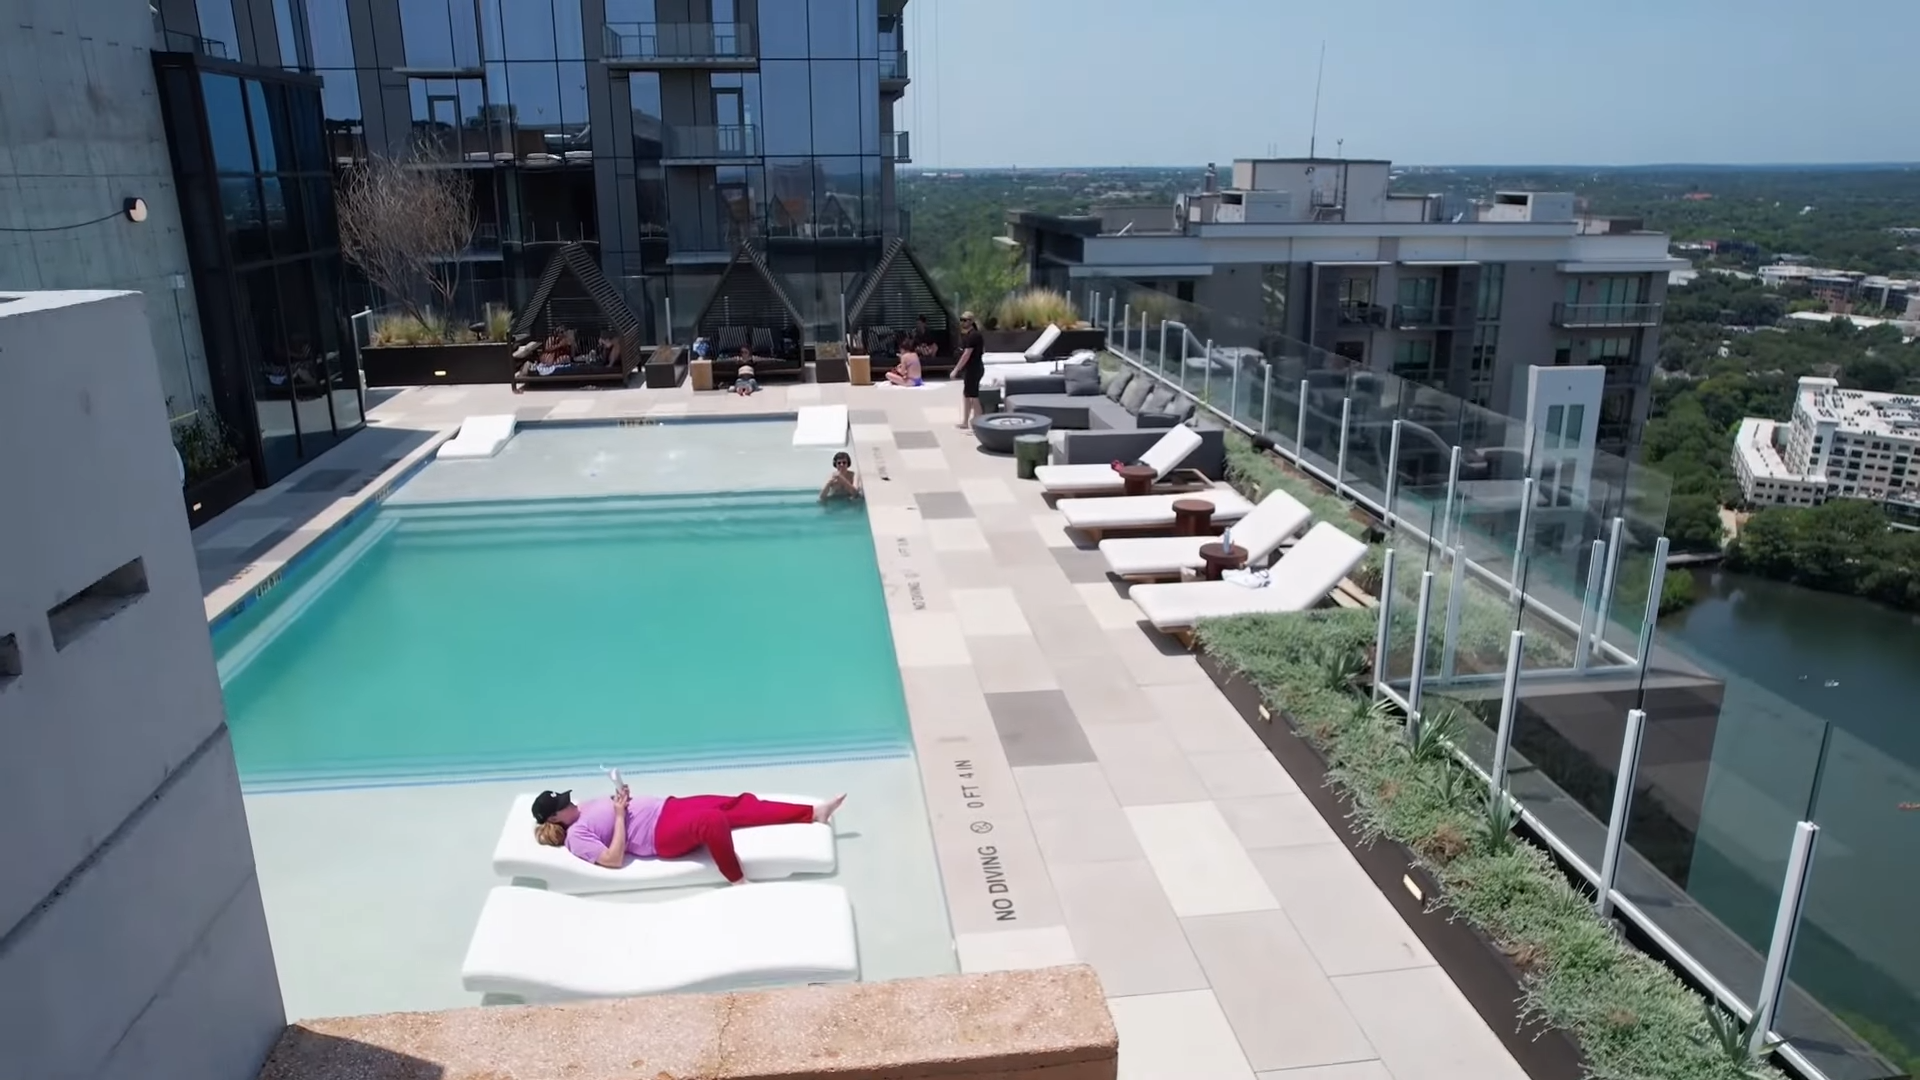 The Natiivo Rooftop Pool